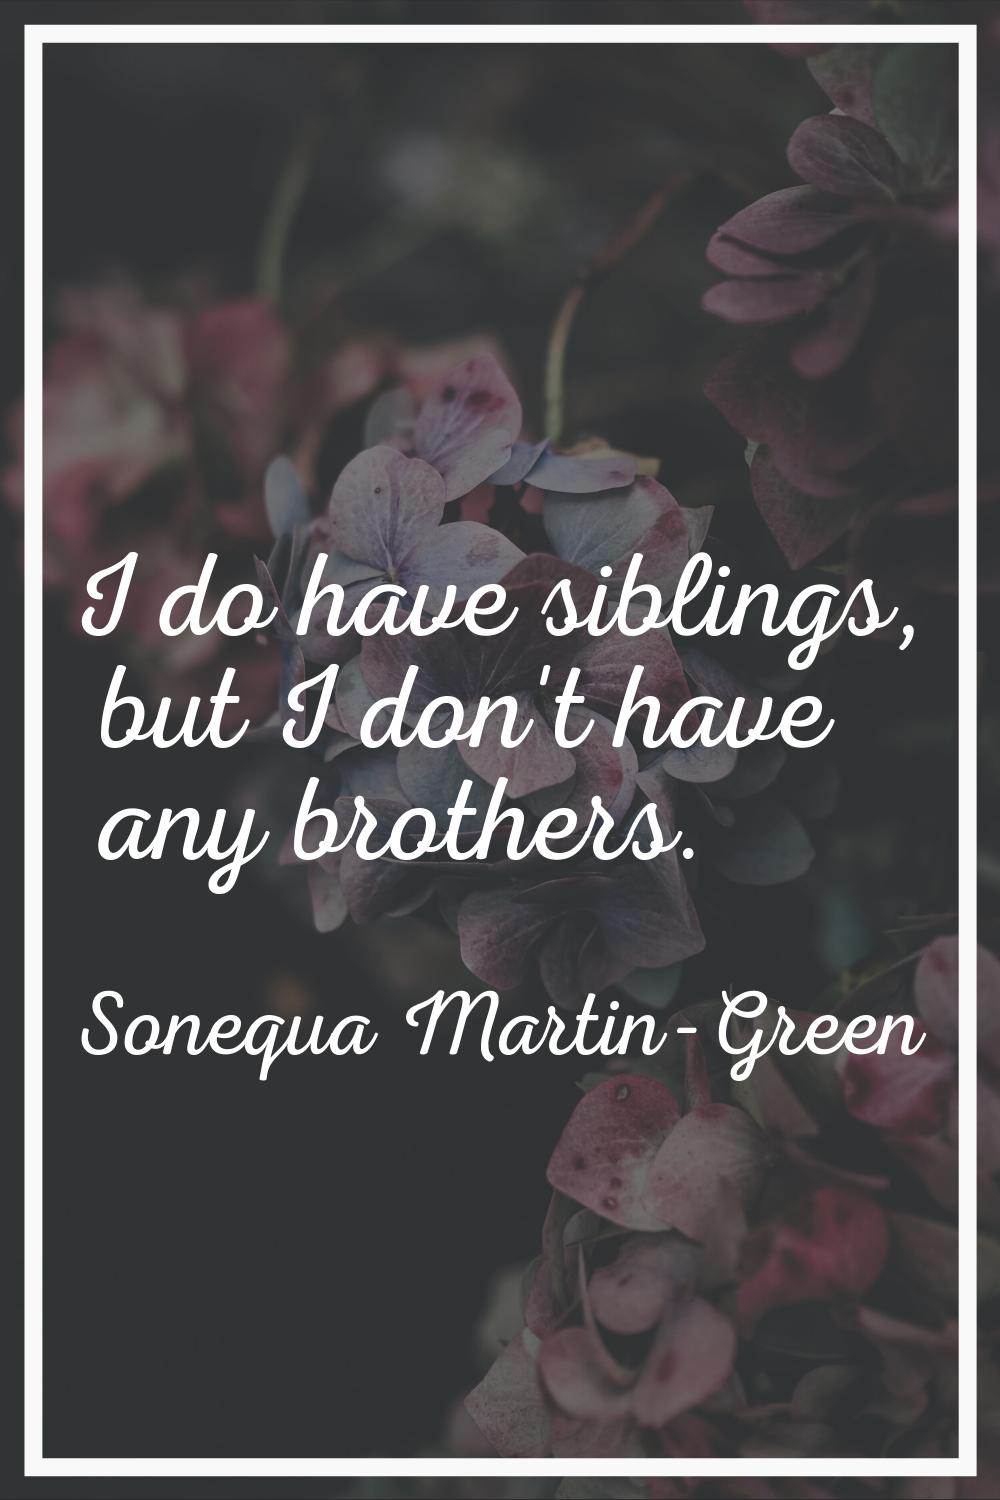 I do have siblings, but I don't have any brothers.